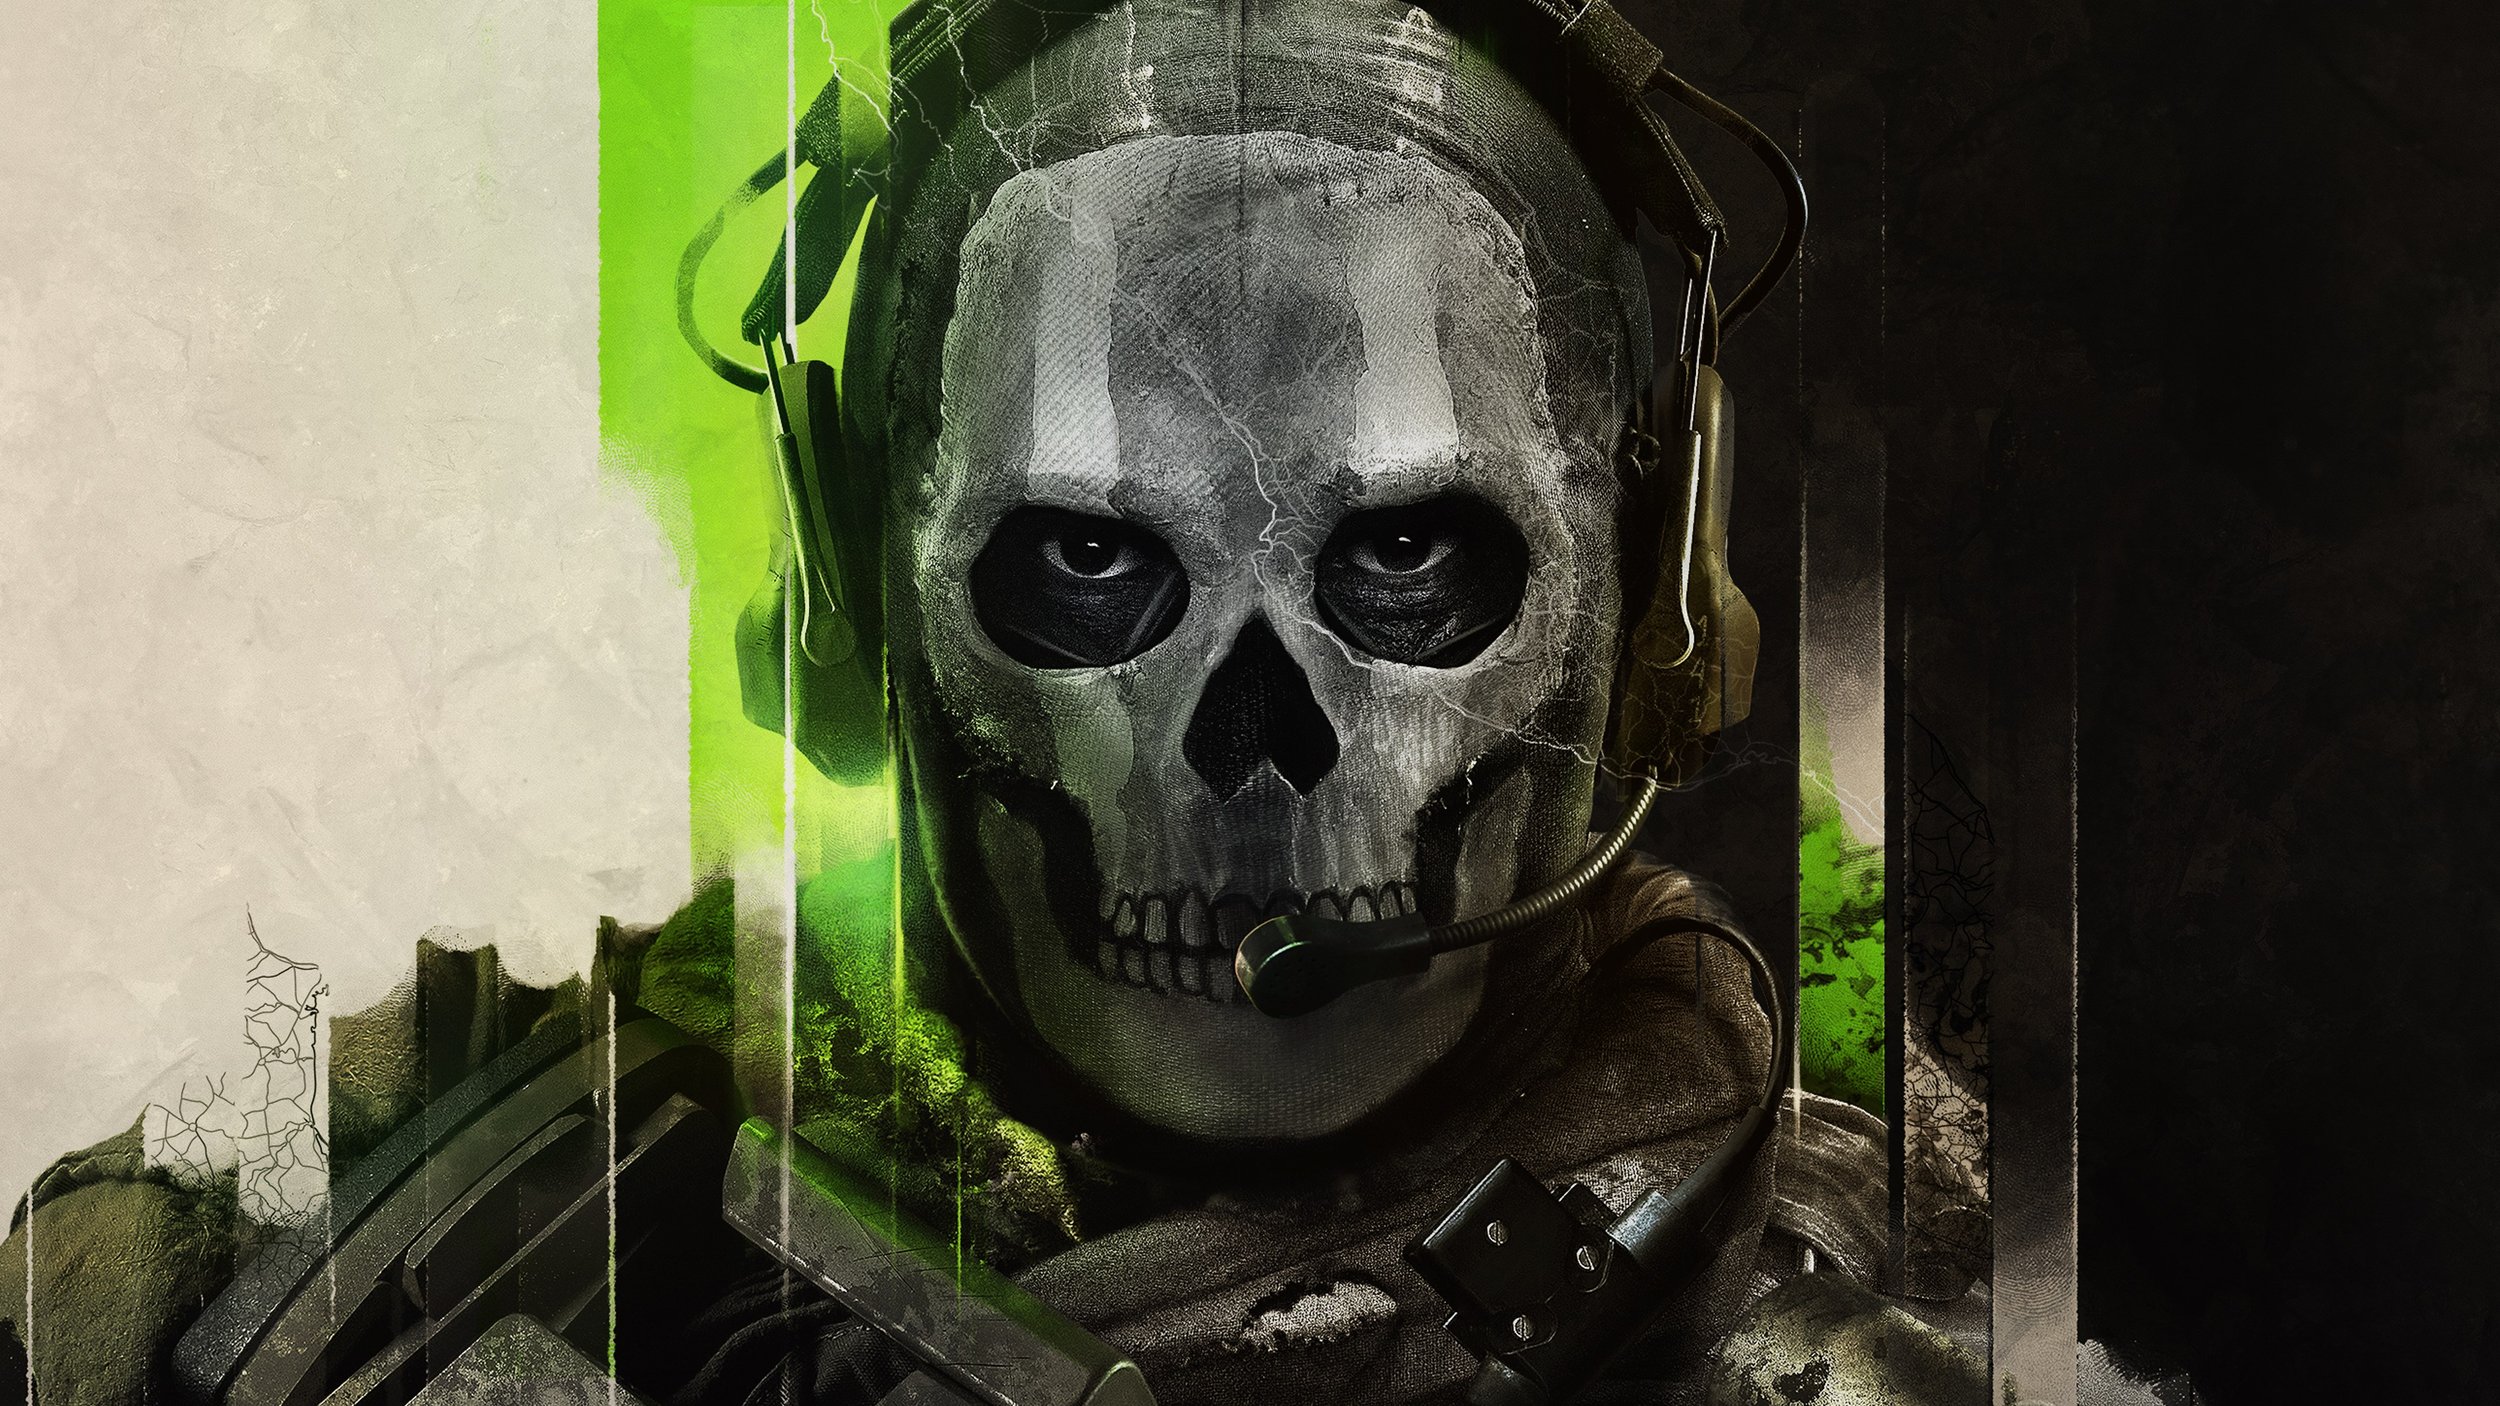 Call of Duty: Ghosts Single-Player Review